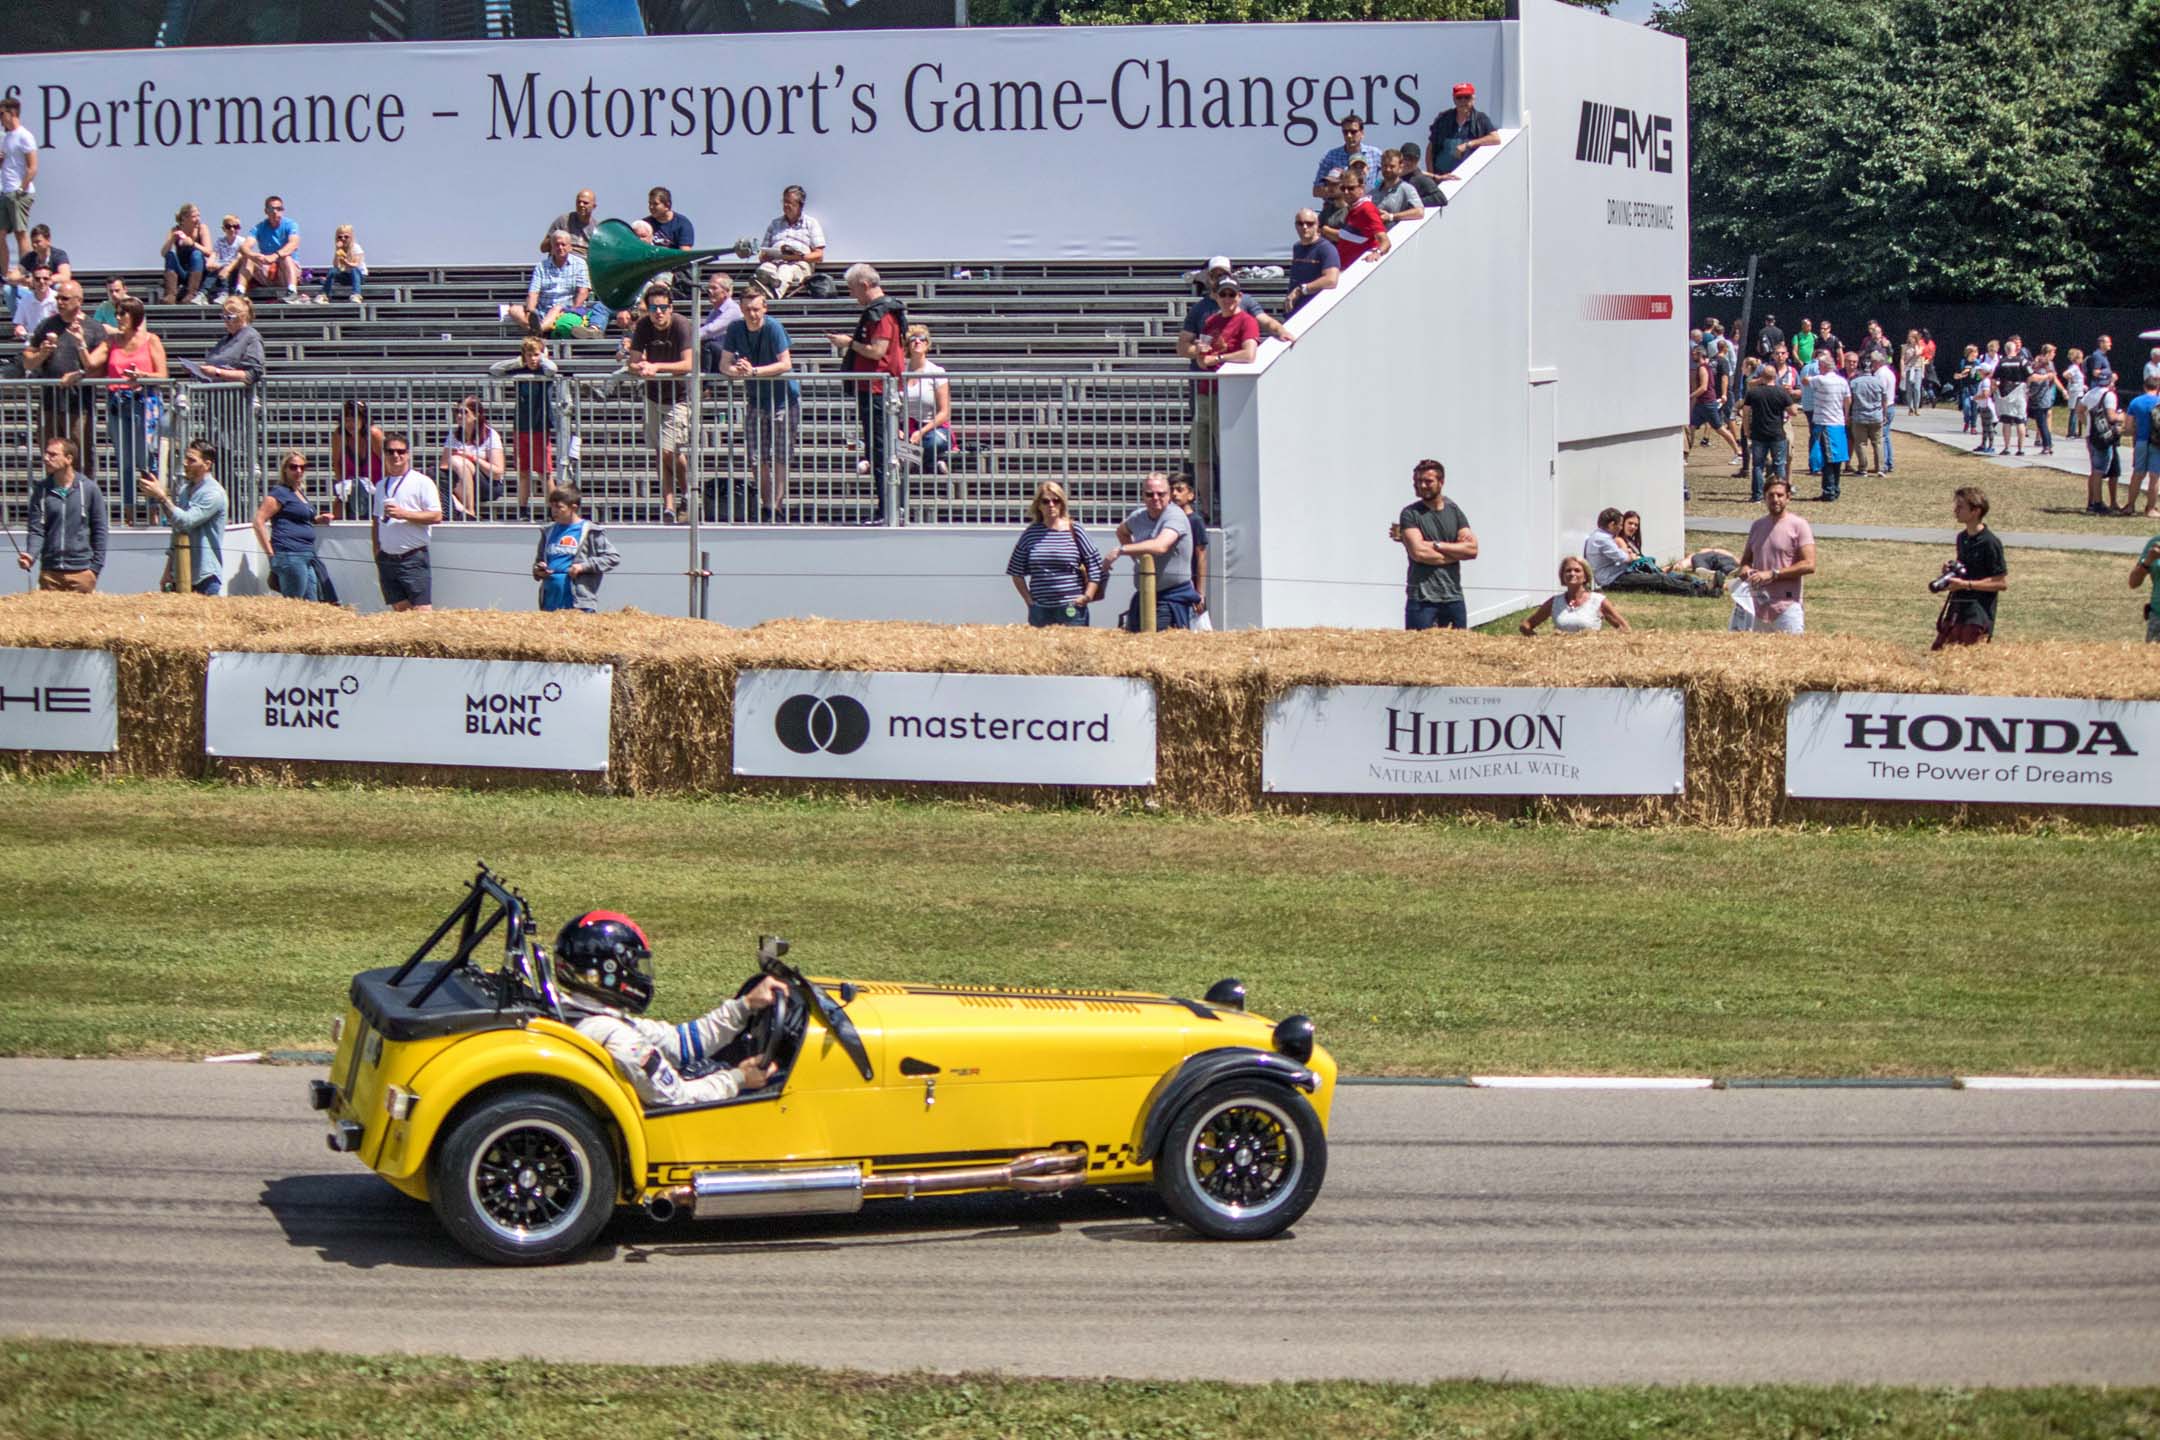 A Caterham 620R gets completely sideways, just on its way back to the staging area. Despite being a half-century old design, the Caterham was the second quickest car up the hill, beating out all the supercars.